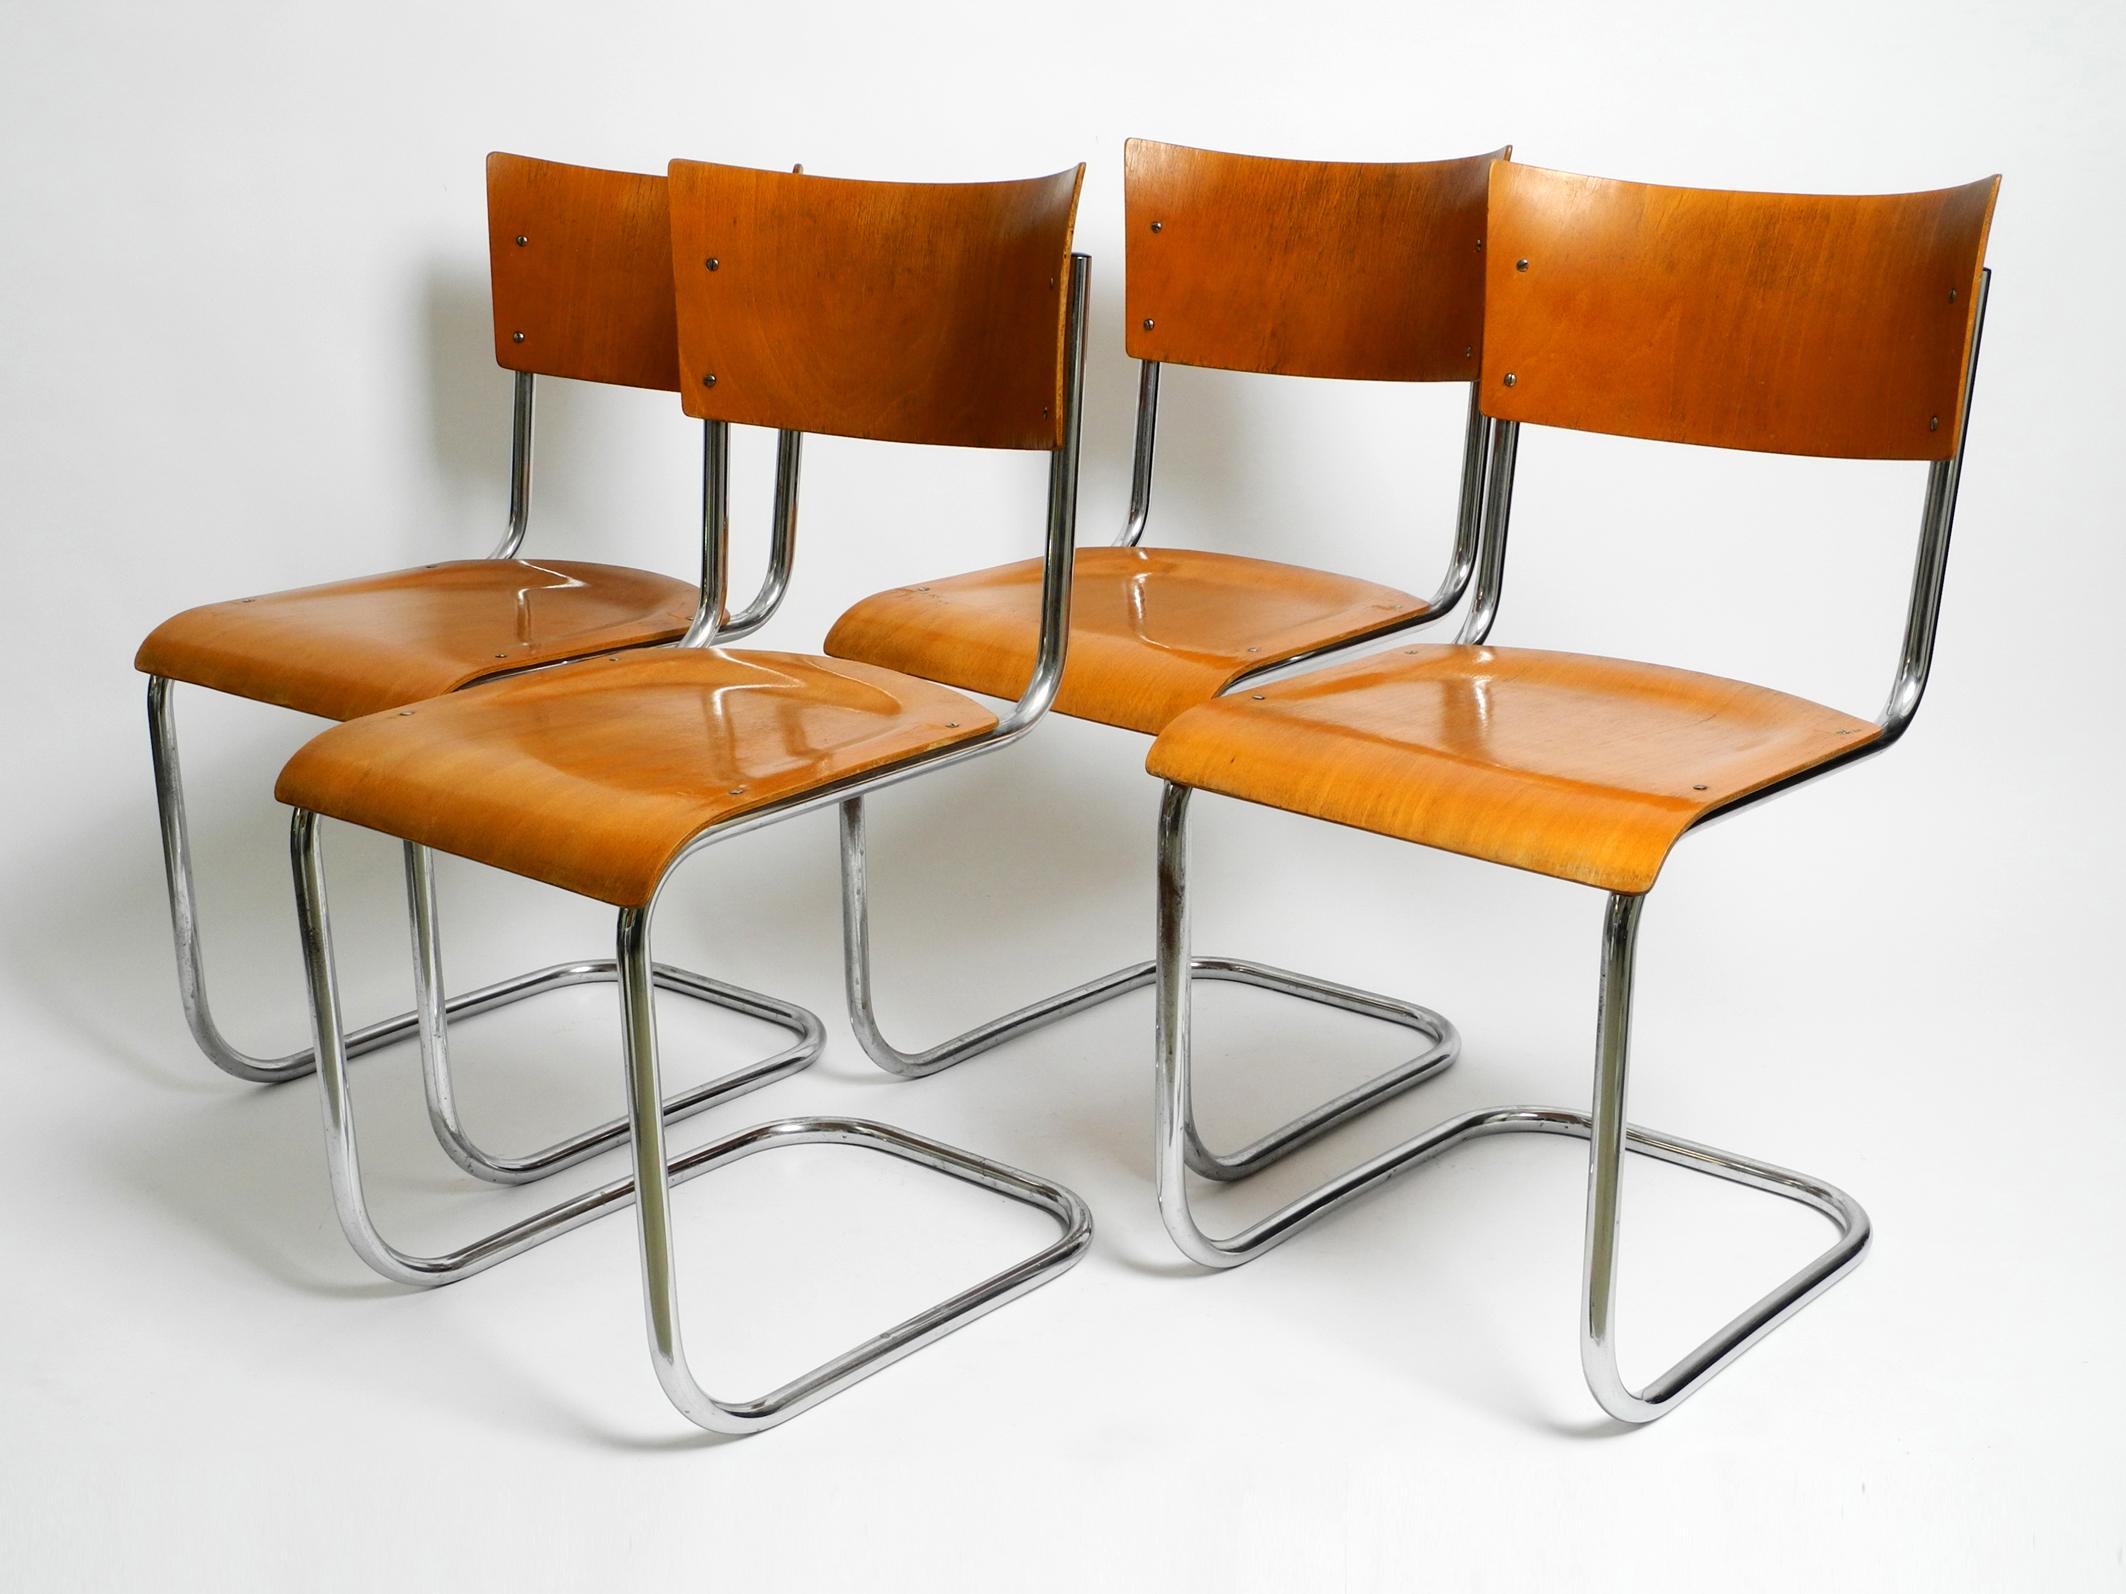 Four 30s cantilever Bauhaus tubular steel chairs by Mart Stam for Robert Slezak In Good Condition For Sale In München, DE